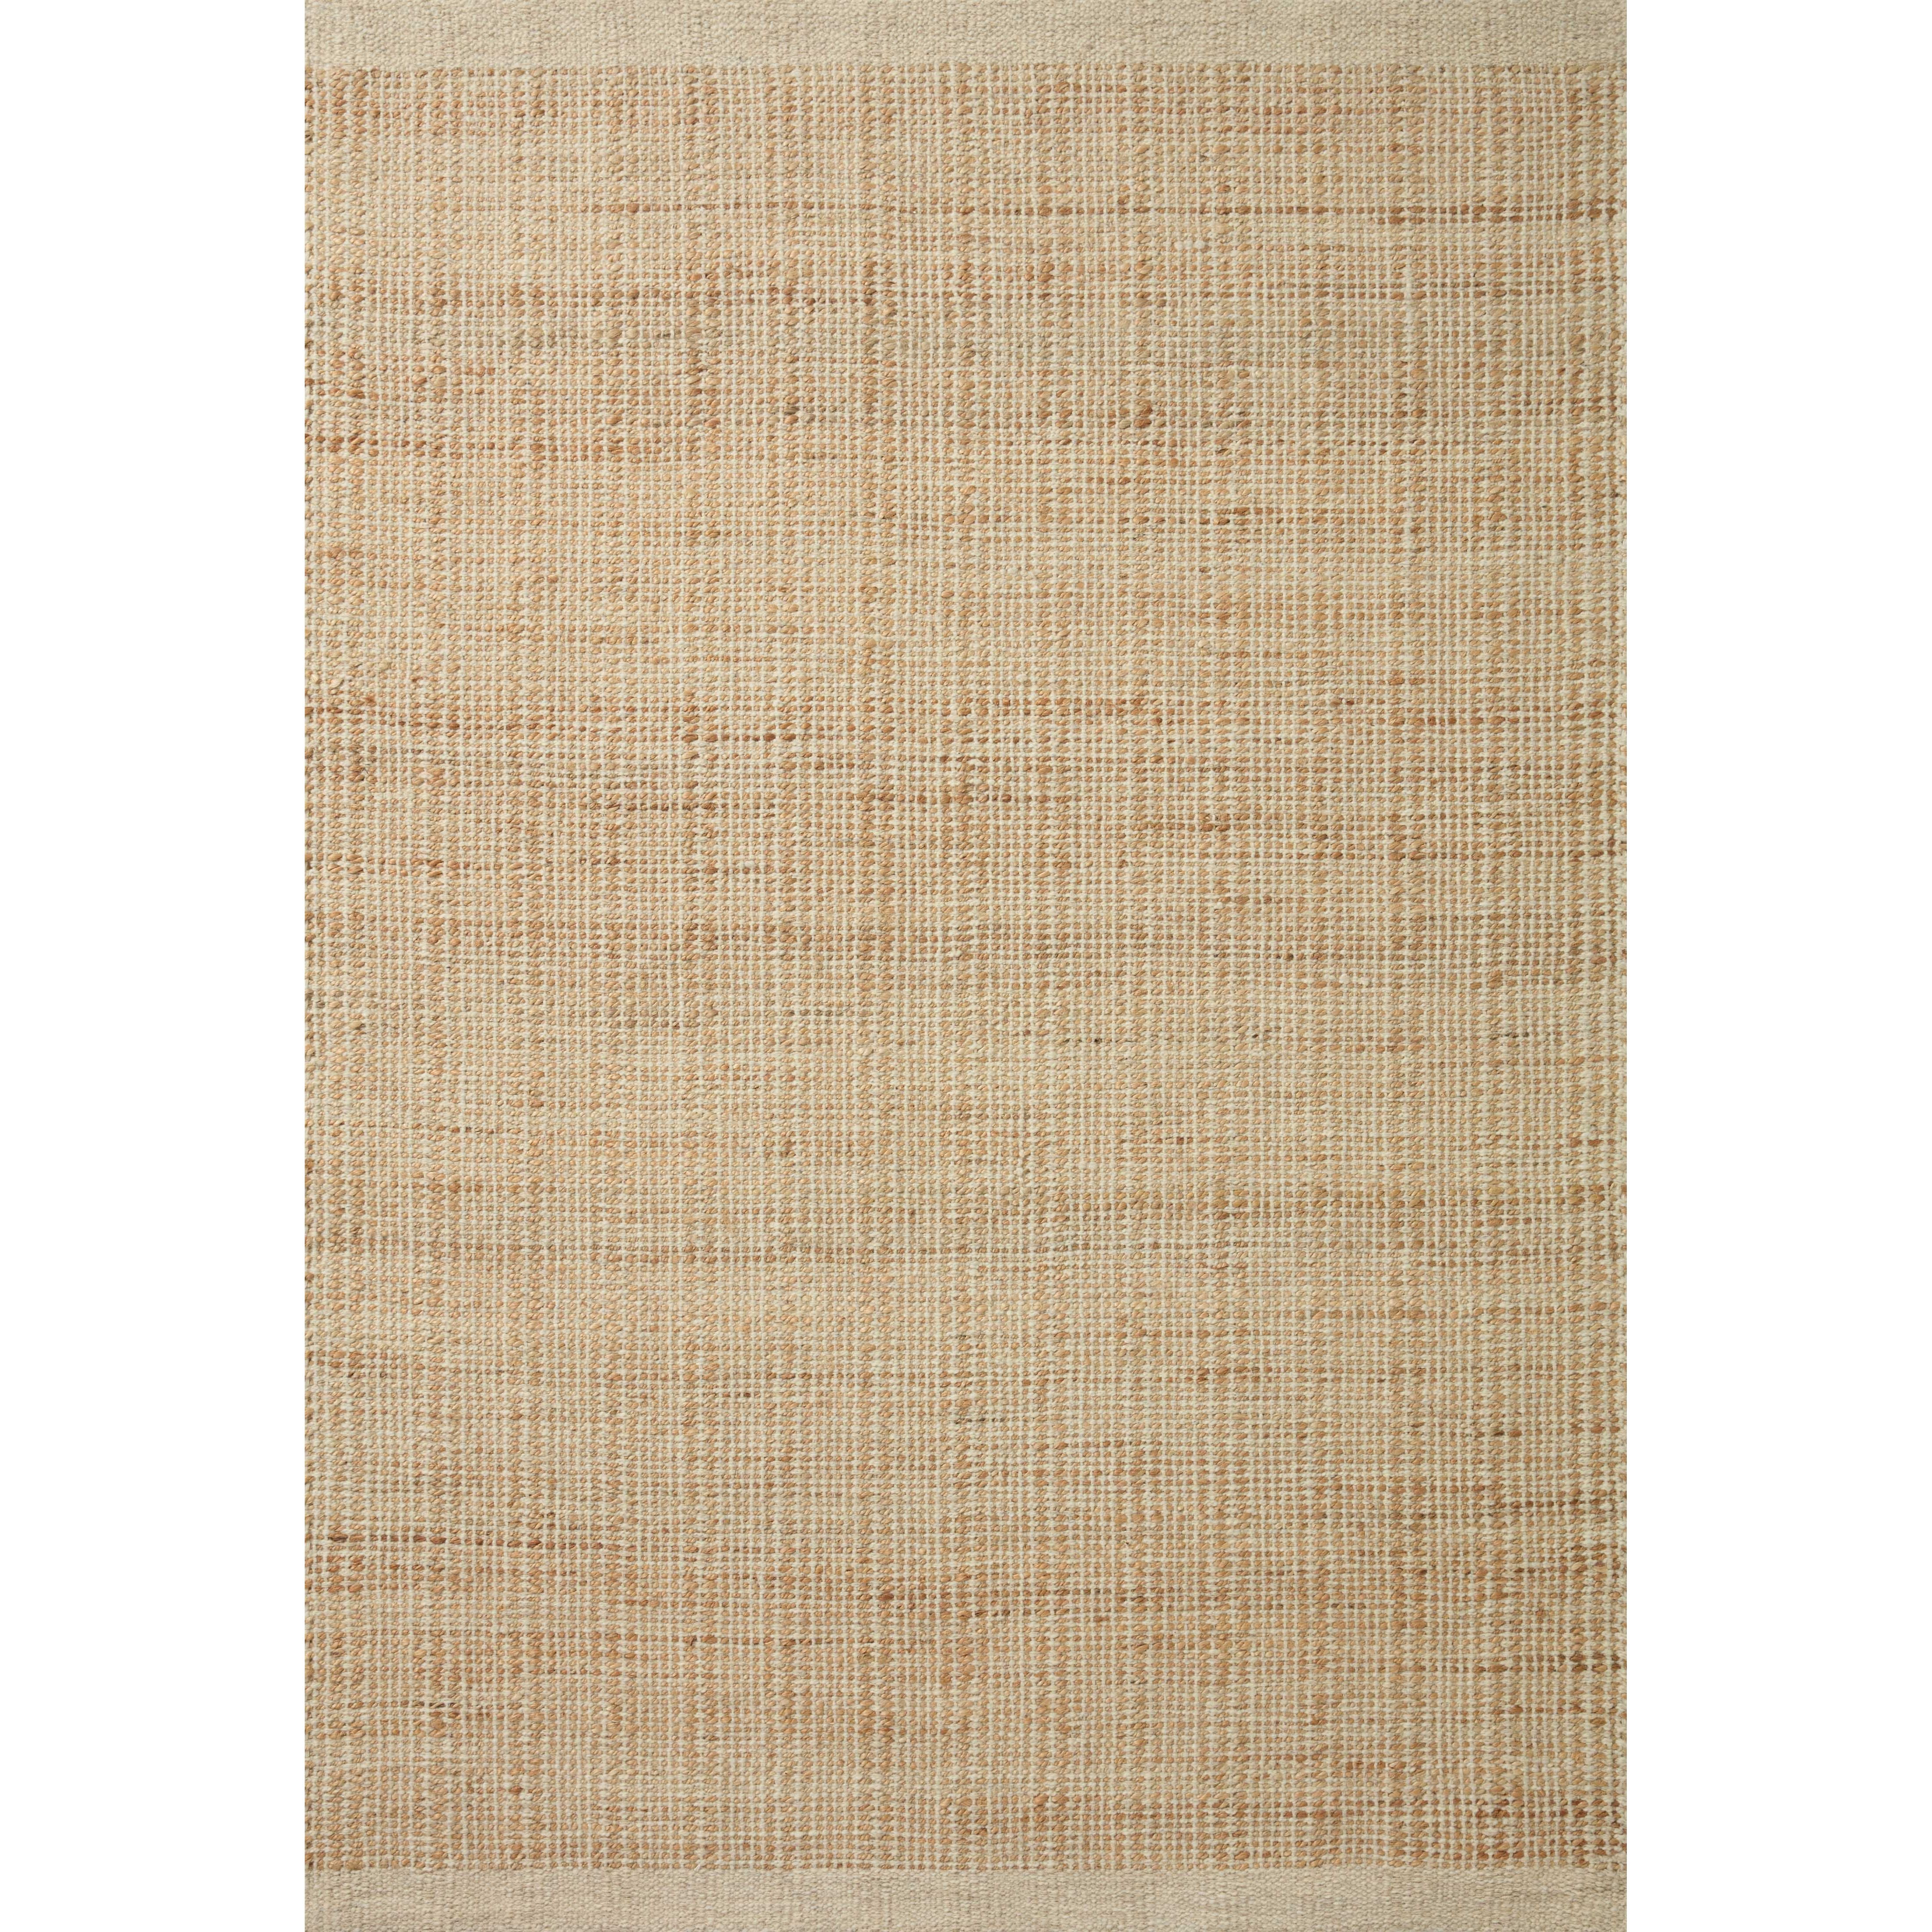 Hand-woven of jute and wool, the Cornwall Ivory / Natural Rug has a natural, organic look with a clean and classic striped design. This area rug collection is an elegant neutral that styles easily in a range of living rooms, bedrooms, dining rooms, and even mudrooms. Soft, earth-toned colors complement the rug’s natural materials and aesthetic. Amethyst Home provides interior design, new construction, custom furniture, and area rugs in the Calabasas metro area.